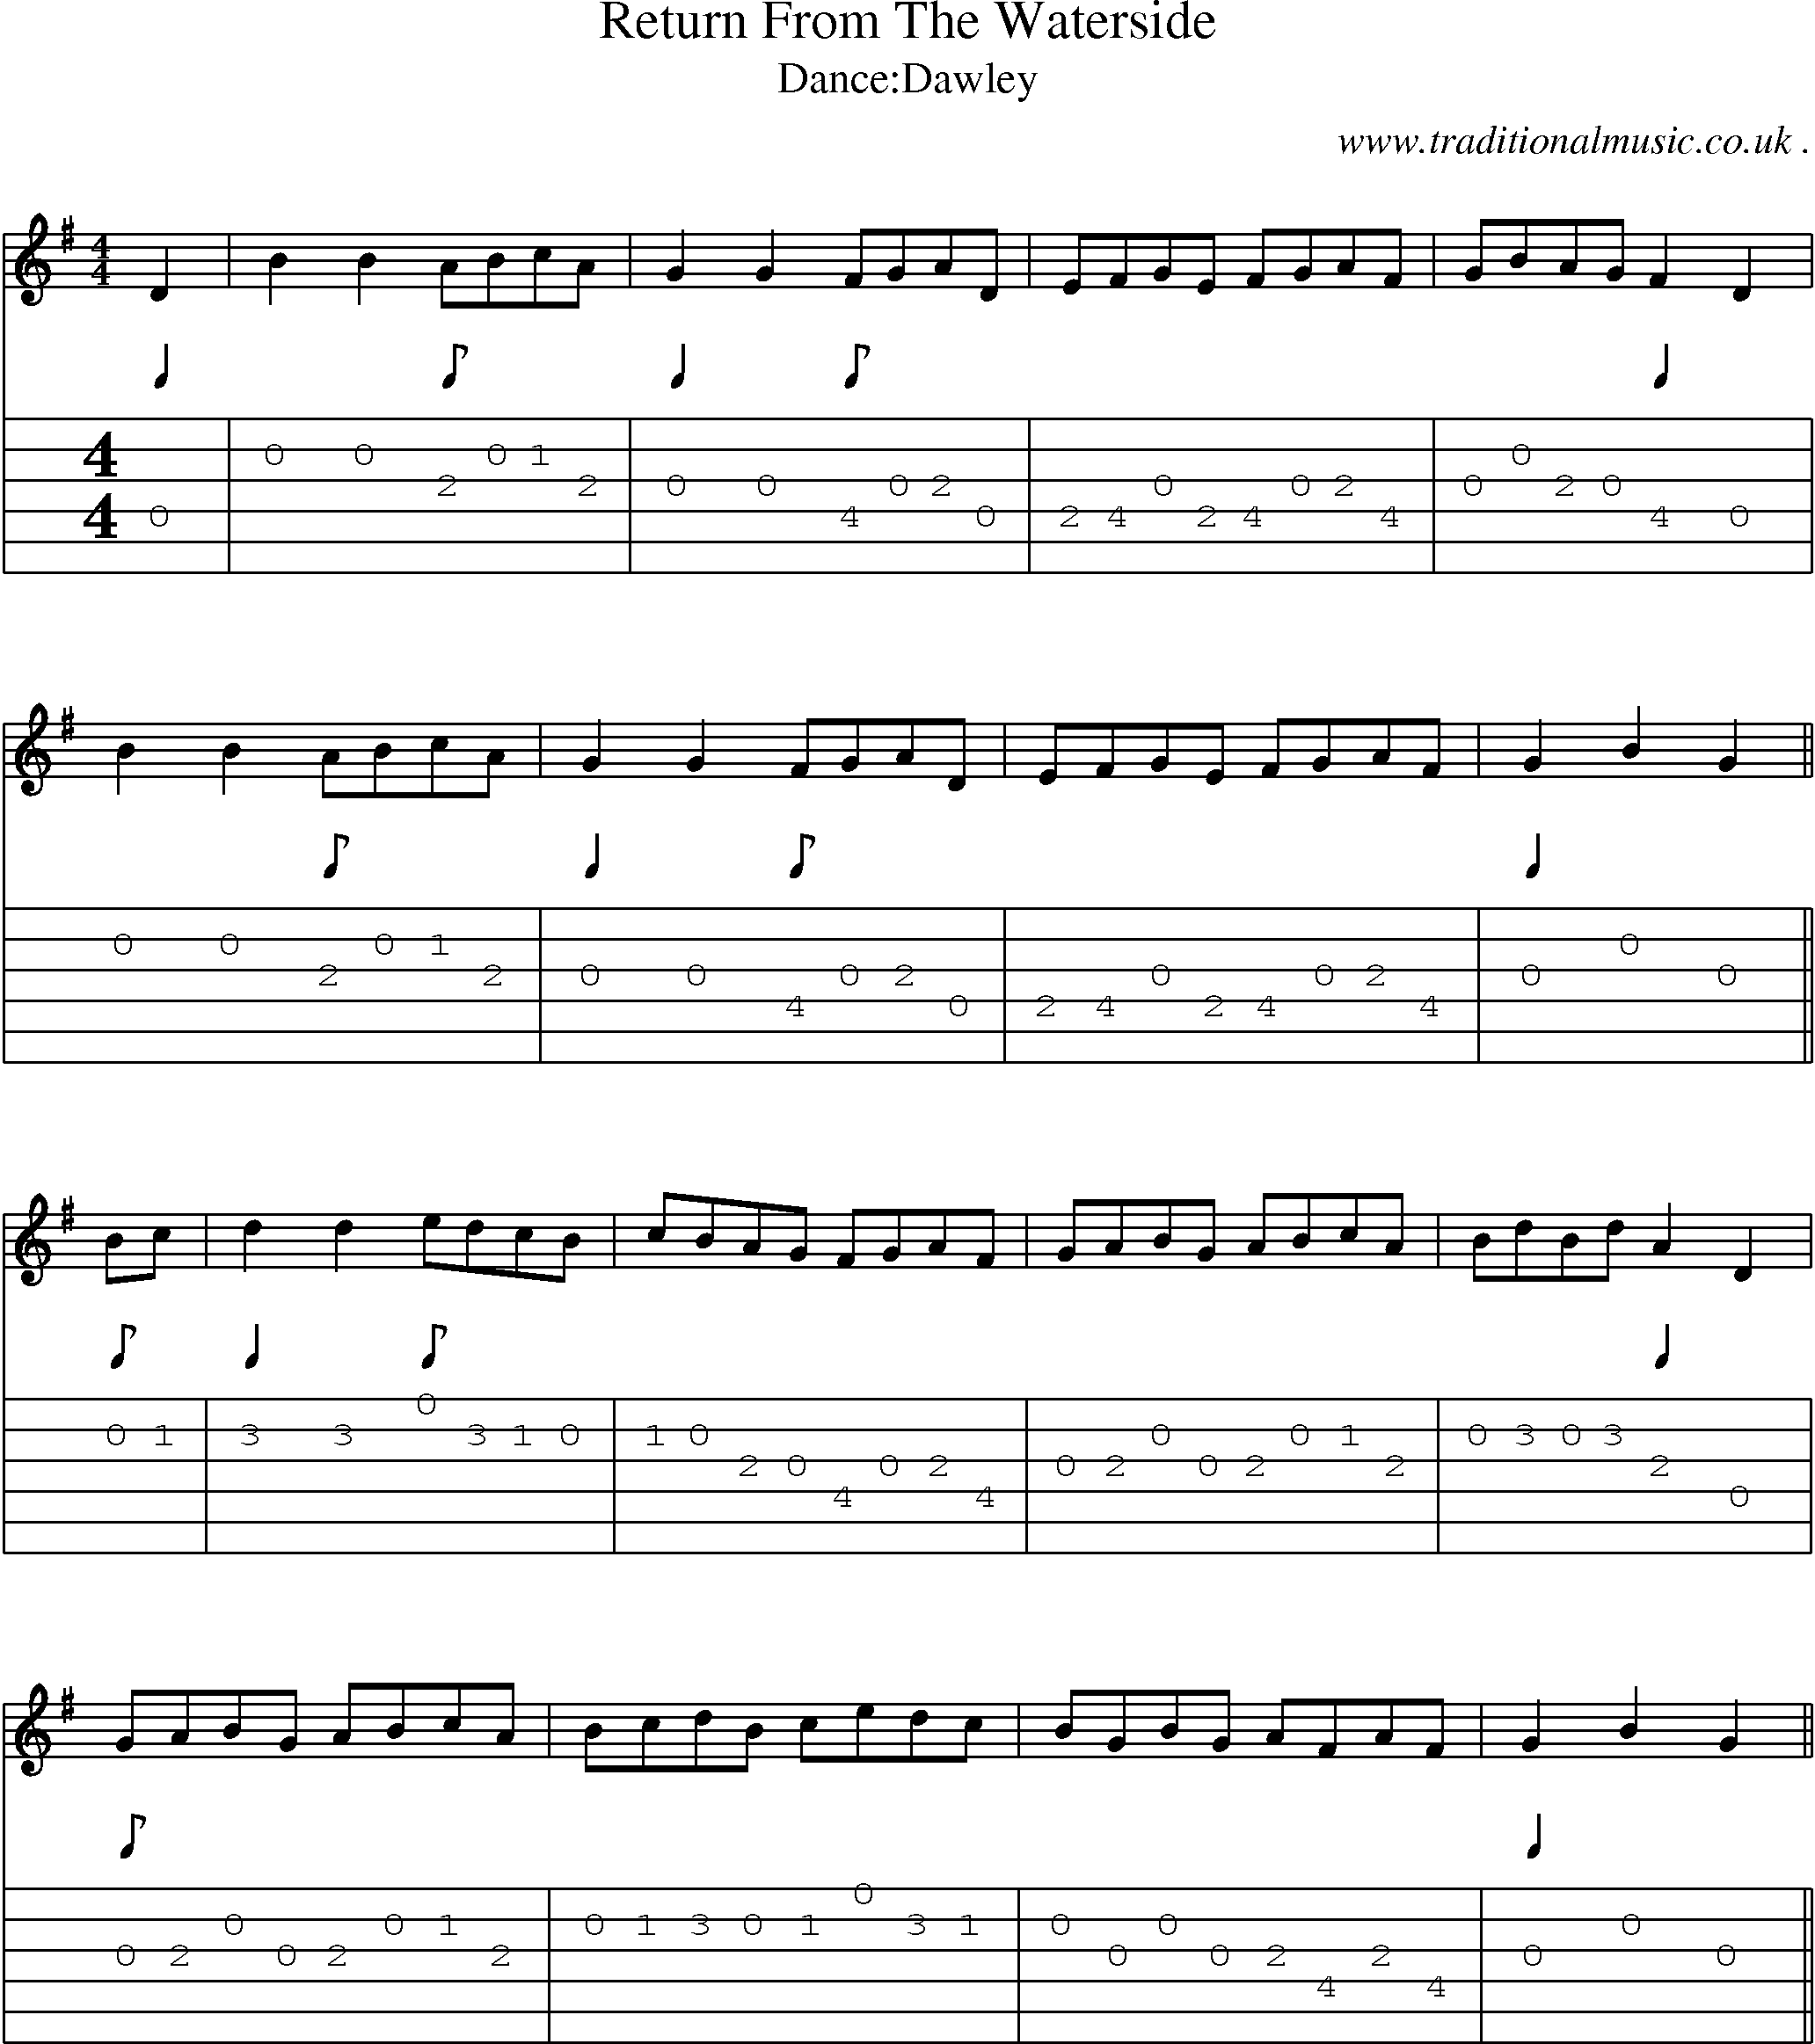 Sheet-Music and Guitar Tabs for Return From The Waterside